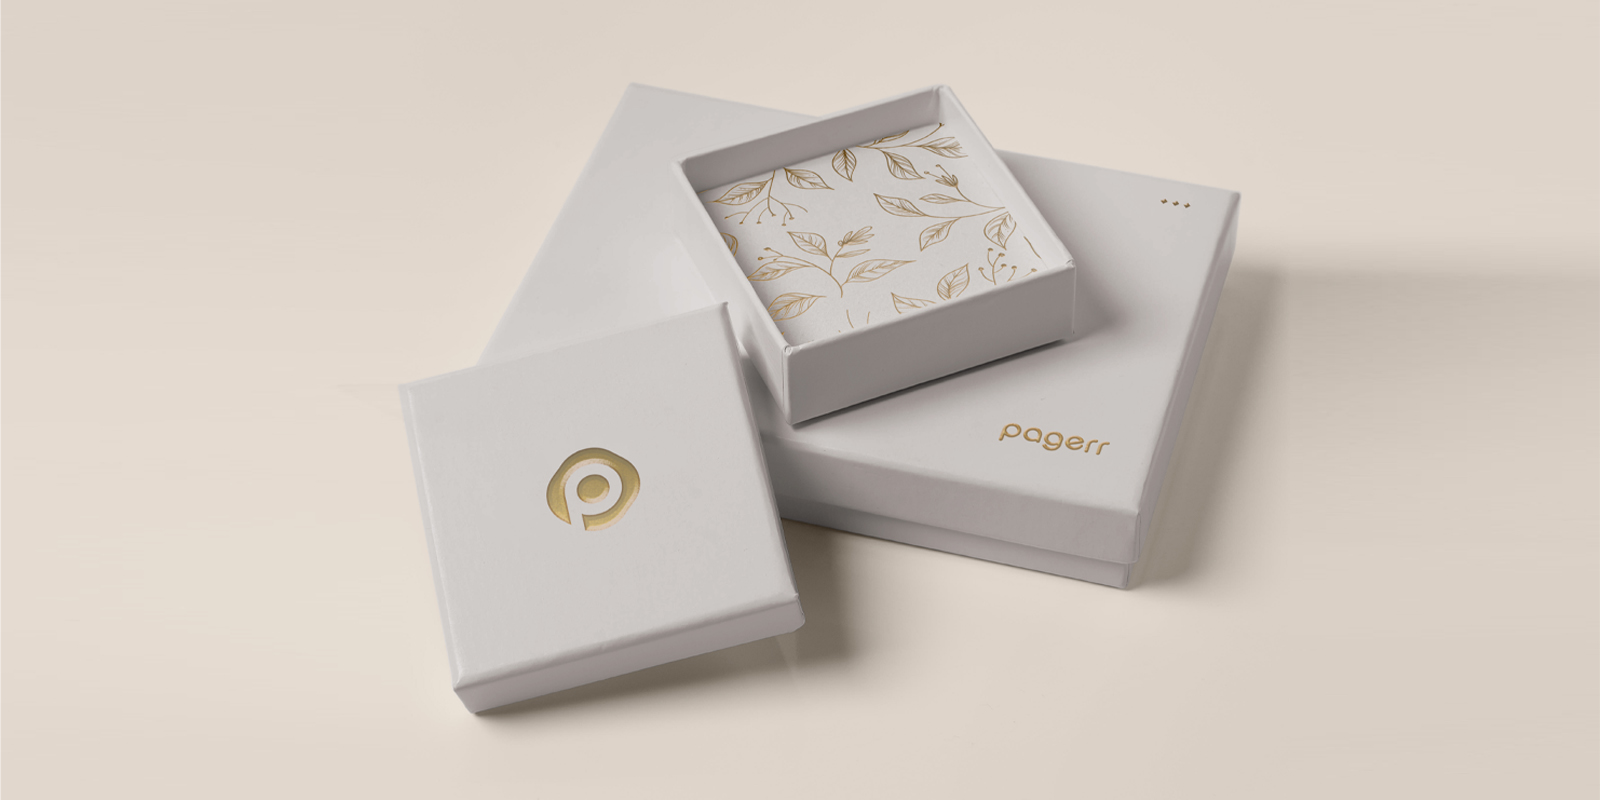 Product boxes in Gold Coast - Print with Pagerr